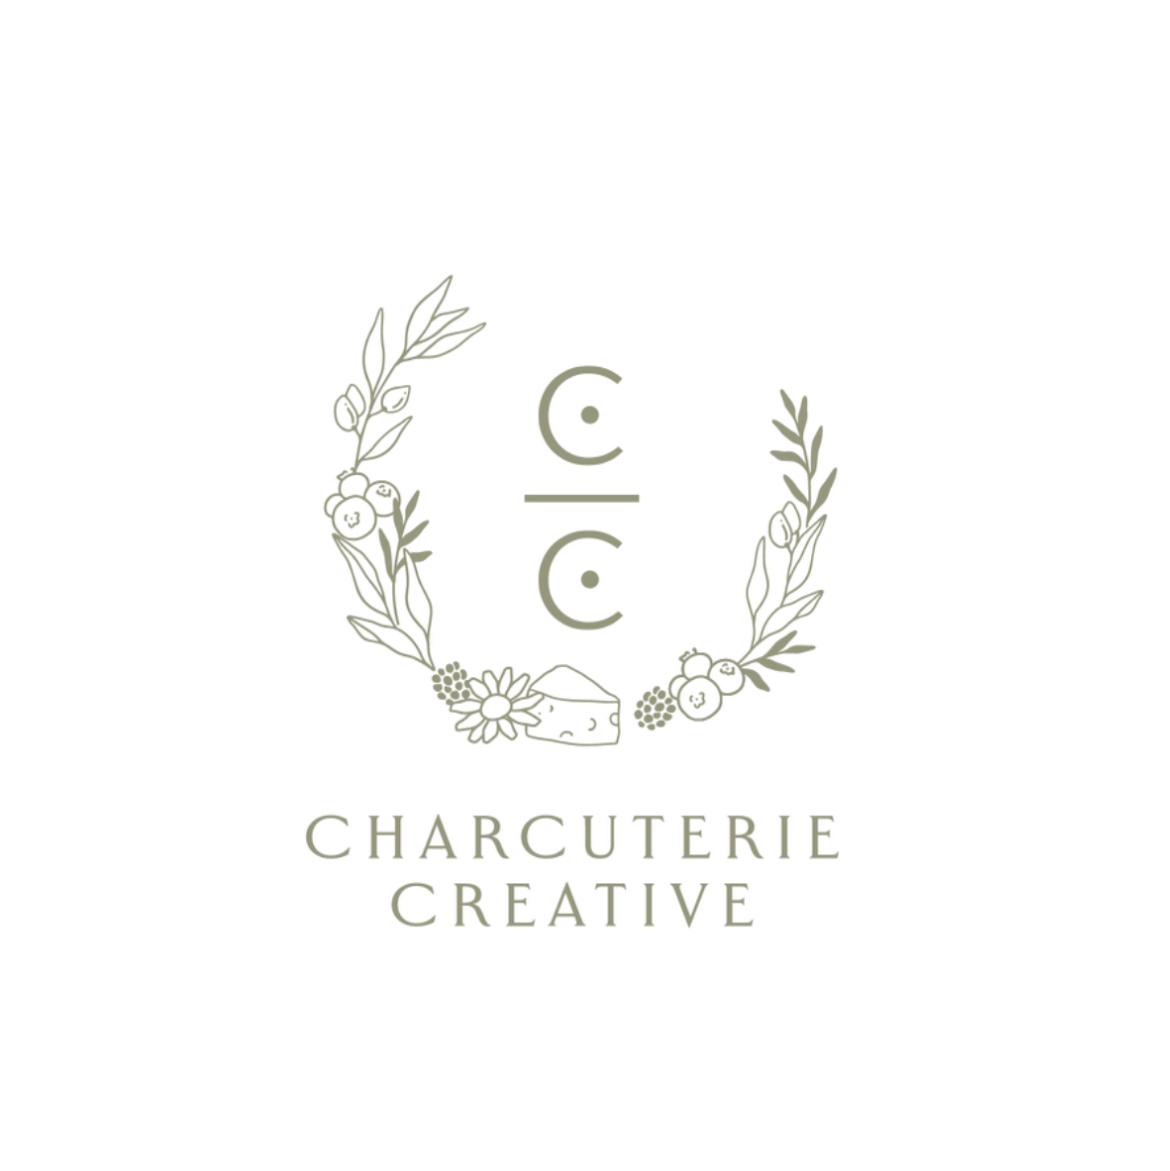 TheCharcreative's images